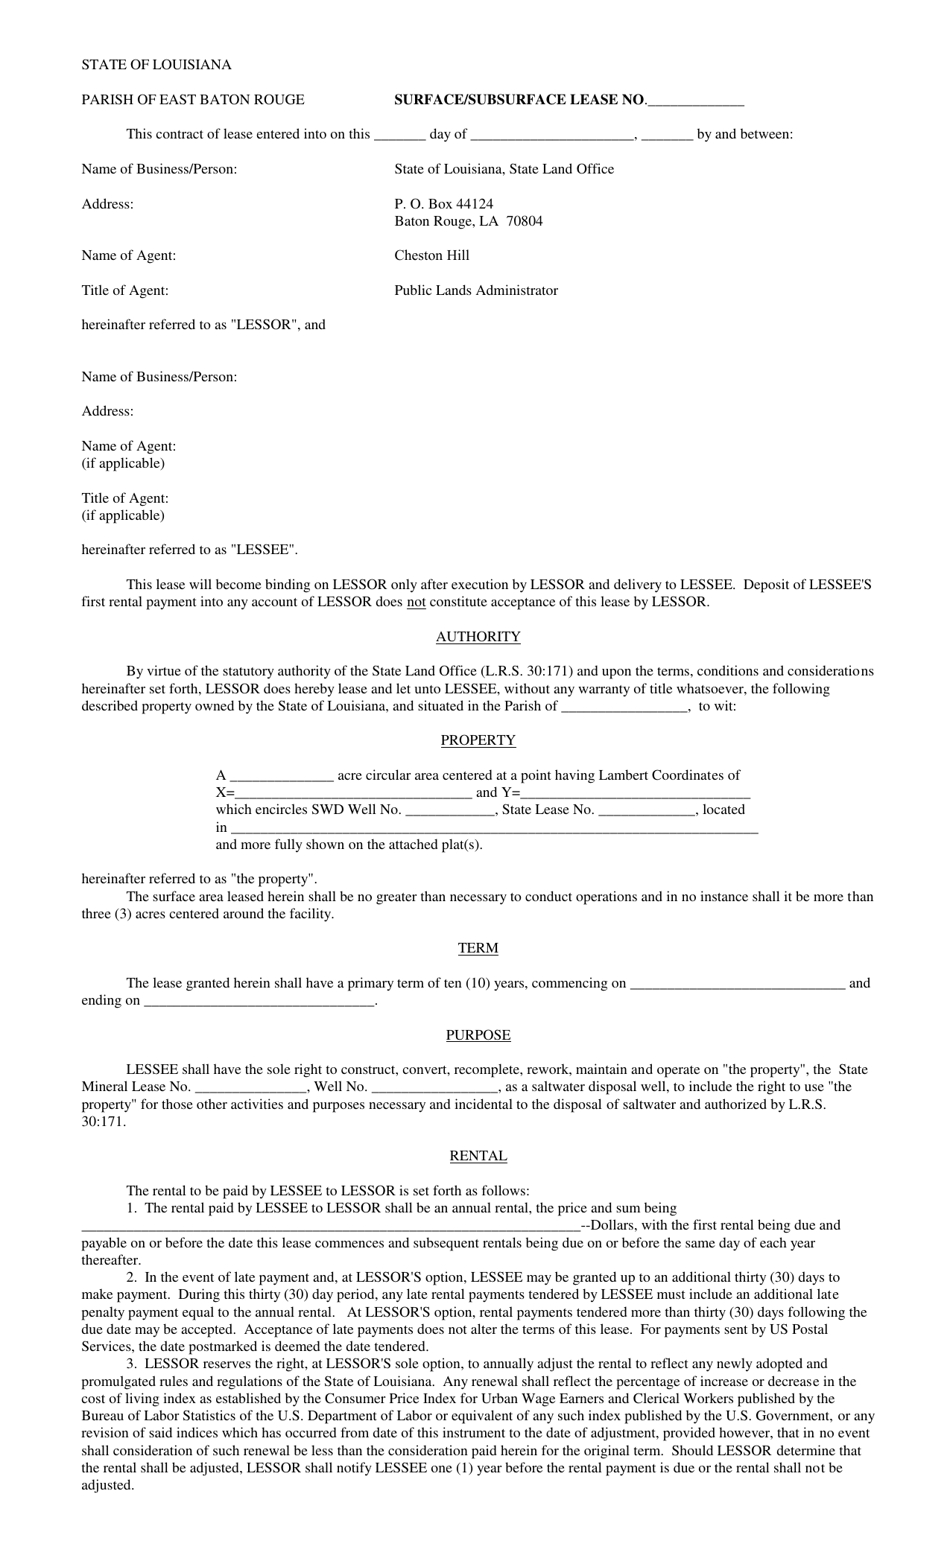 Surface / Subsurface Lease - Louisiana, Page 1